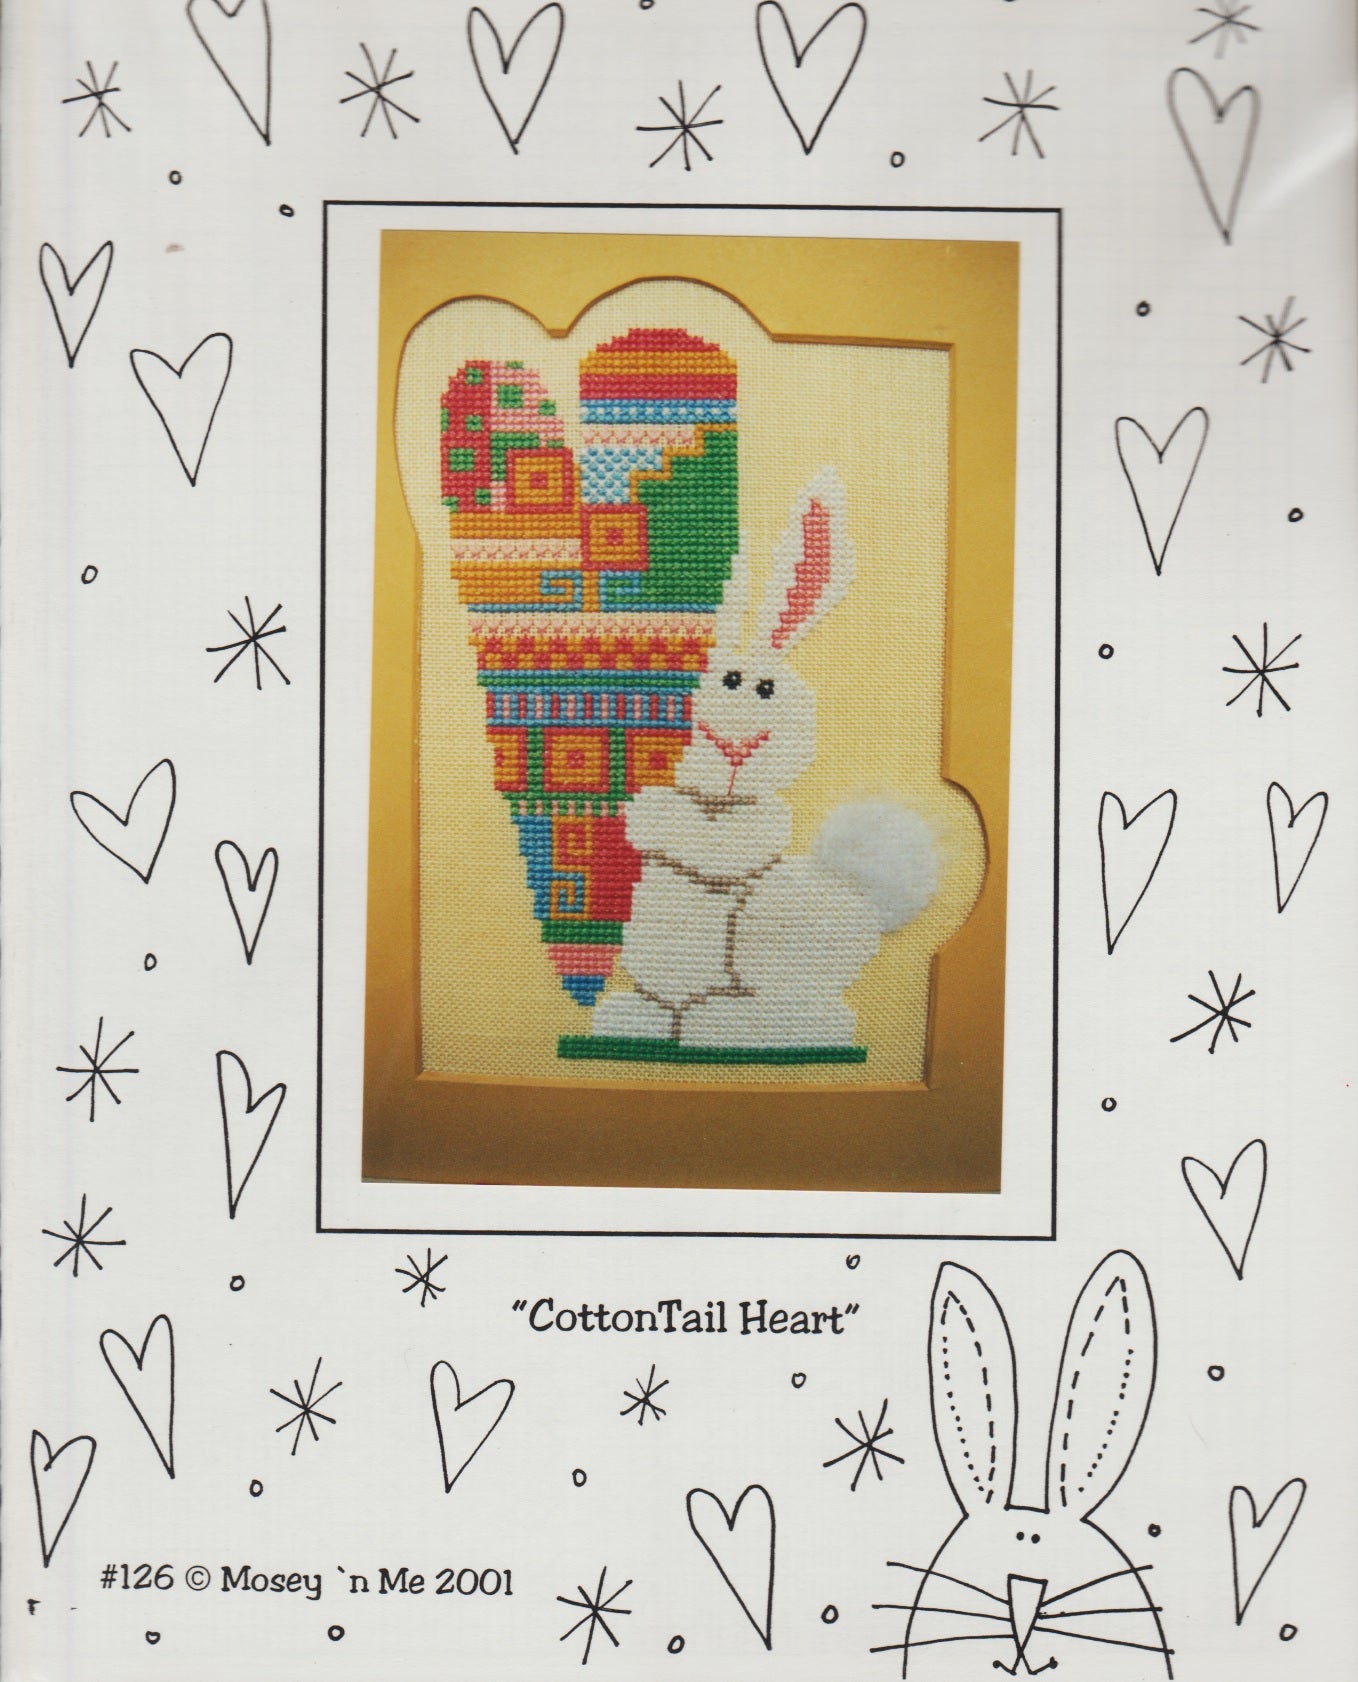 Mosey 'n Me CottonTail Heart Easter cross stitch pattern